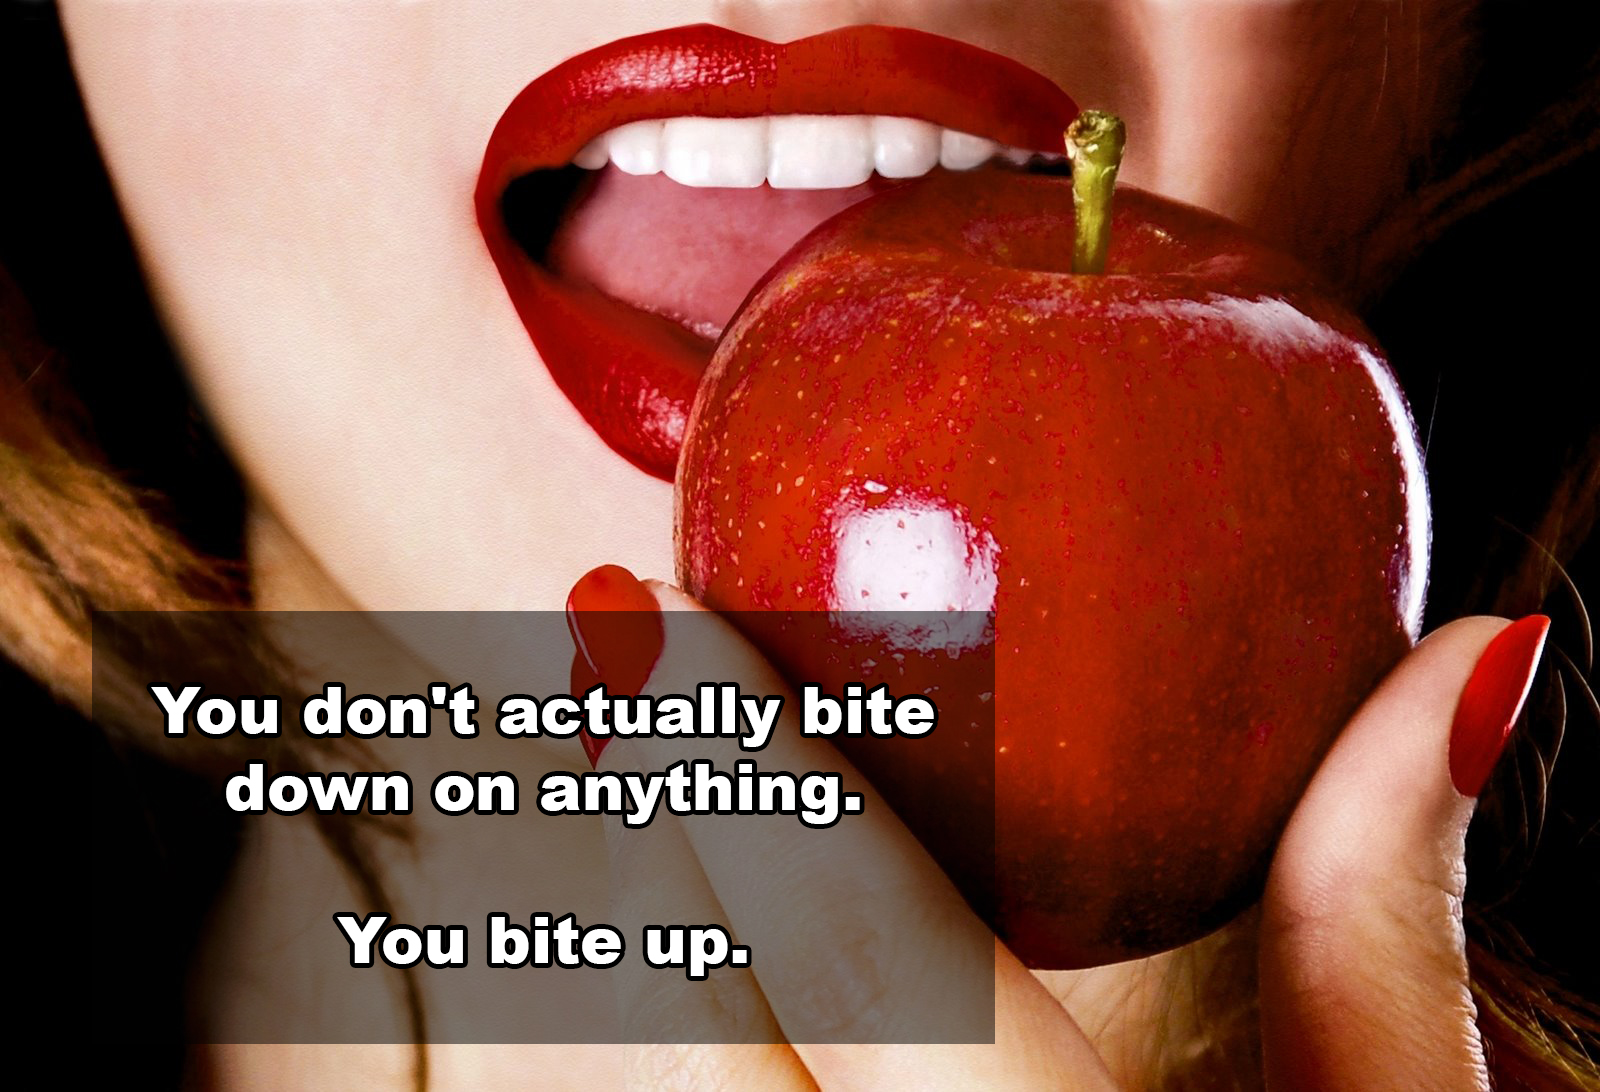 woman eating an apple - You don't actually bite down on anything. You bite up.